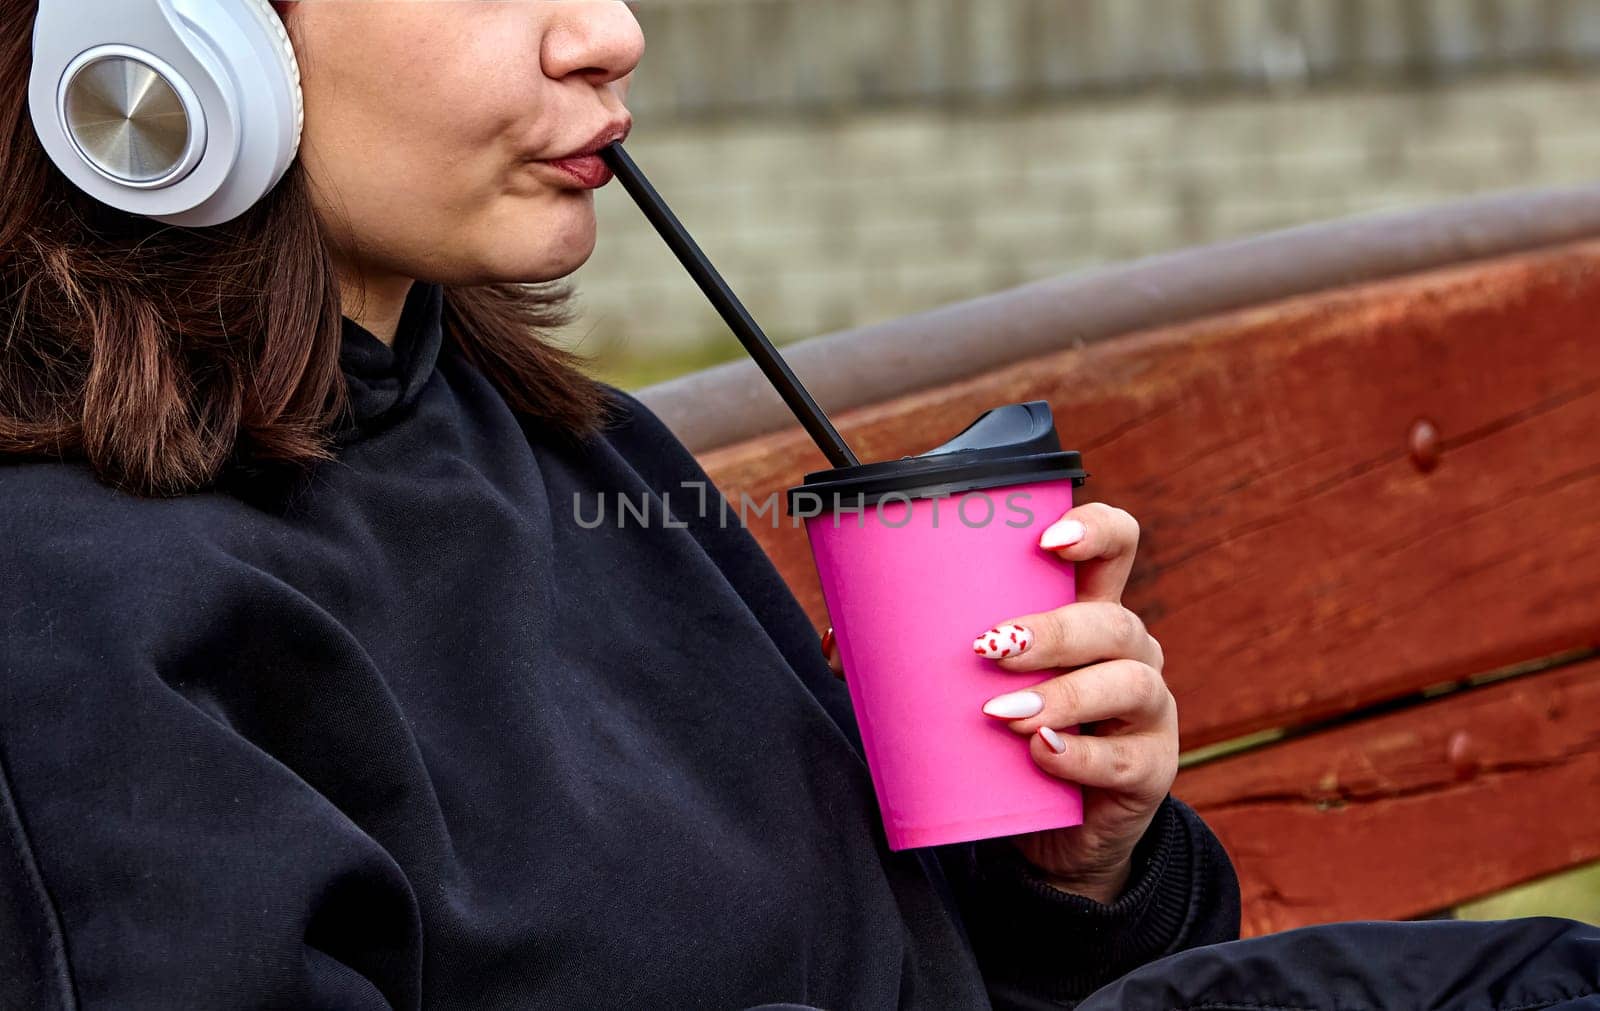 A young woman with long brown hair and white headphones is drinking from a pink cup with a straw. She is wearing a black sweatshirt and has her nails painted pink with white polka dots.